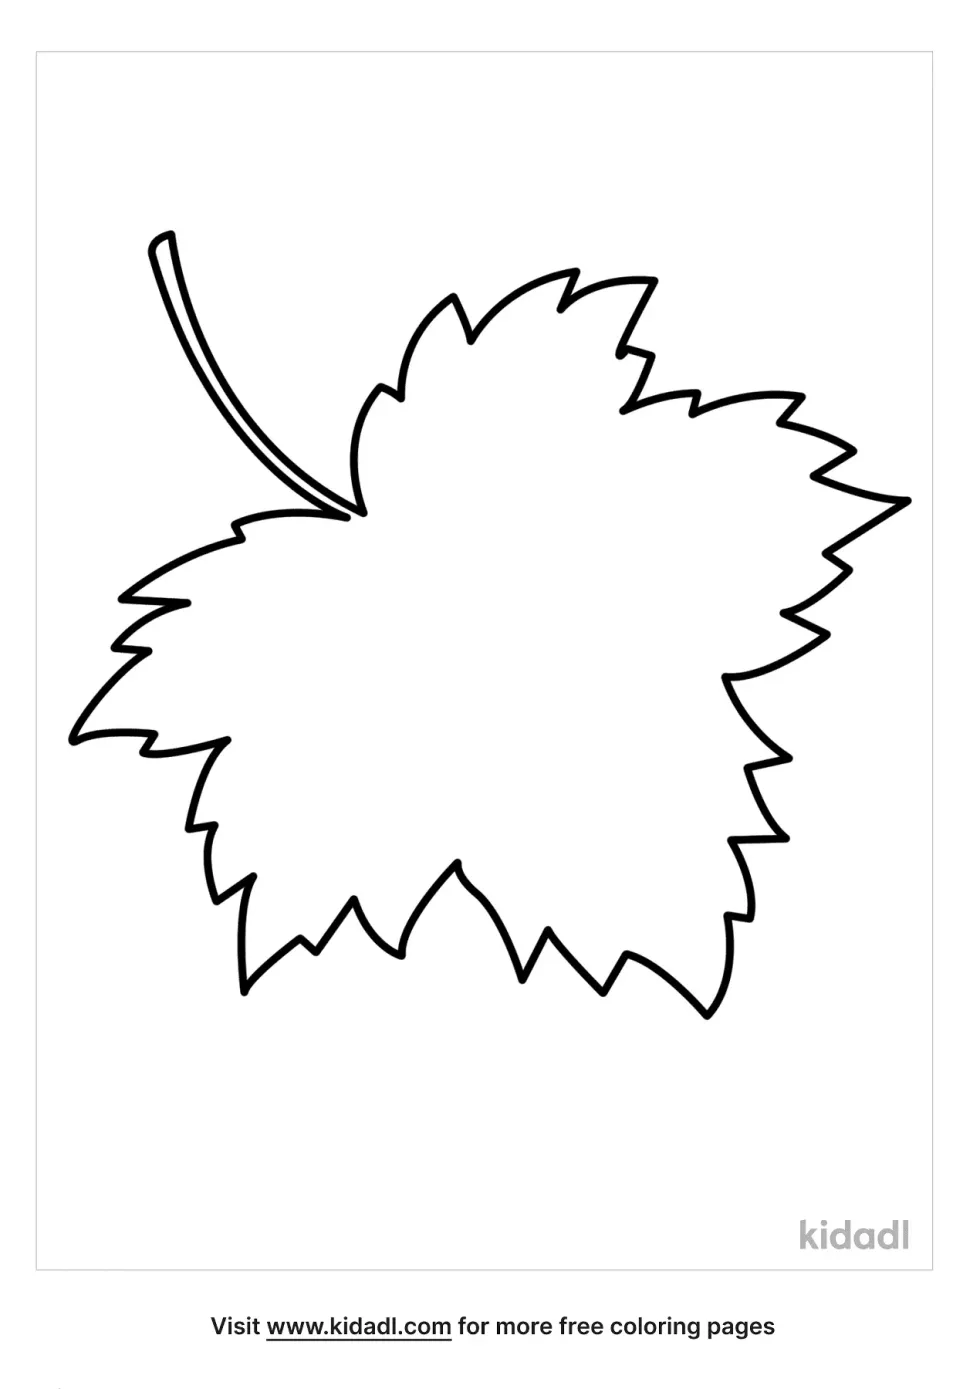 Leaf Outlines Coloring Page